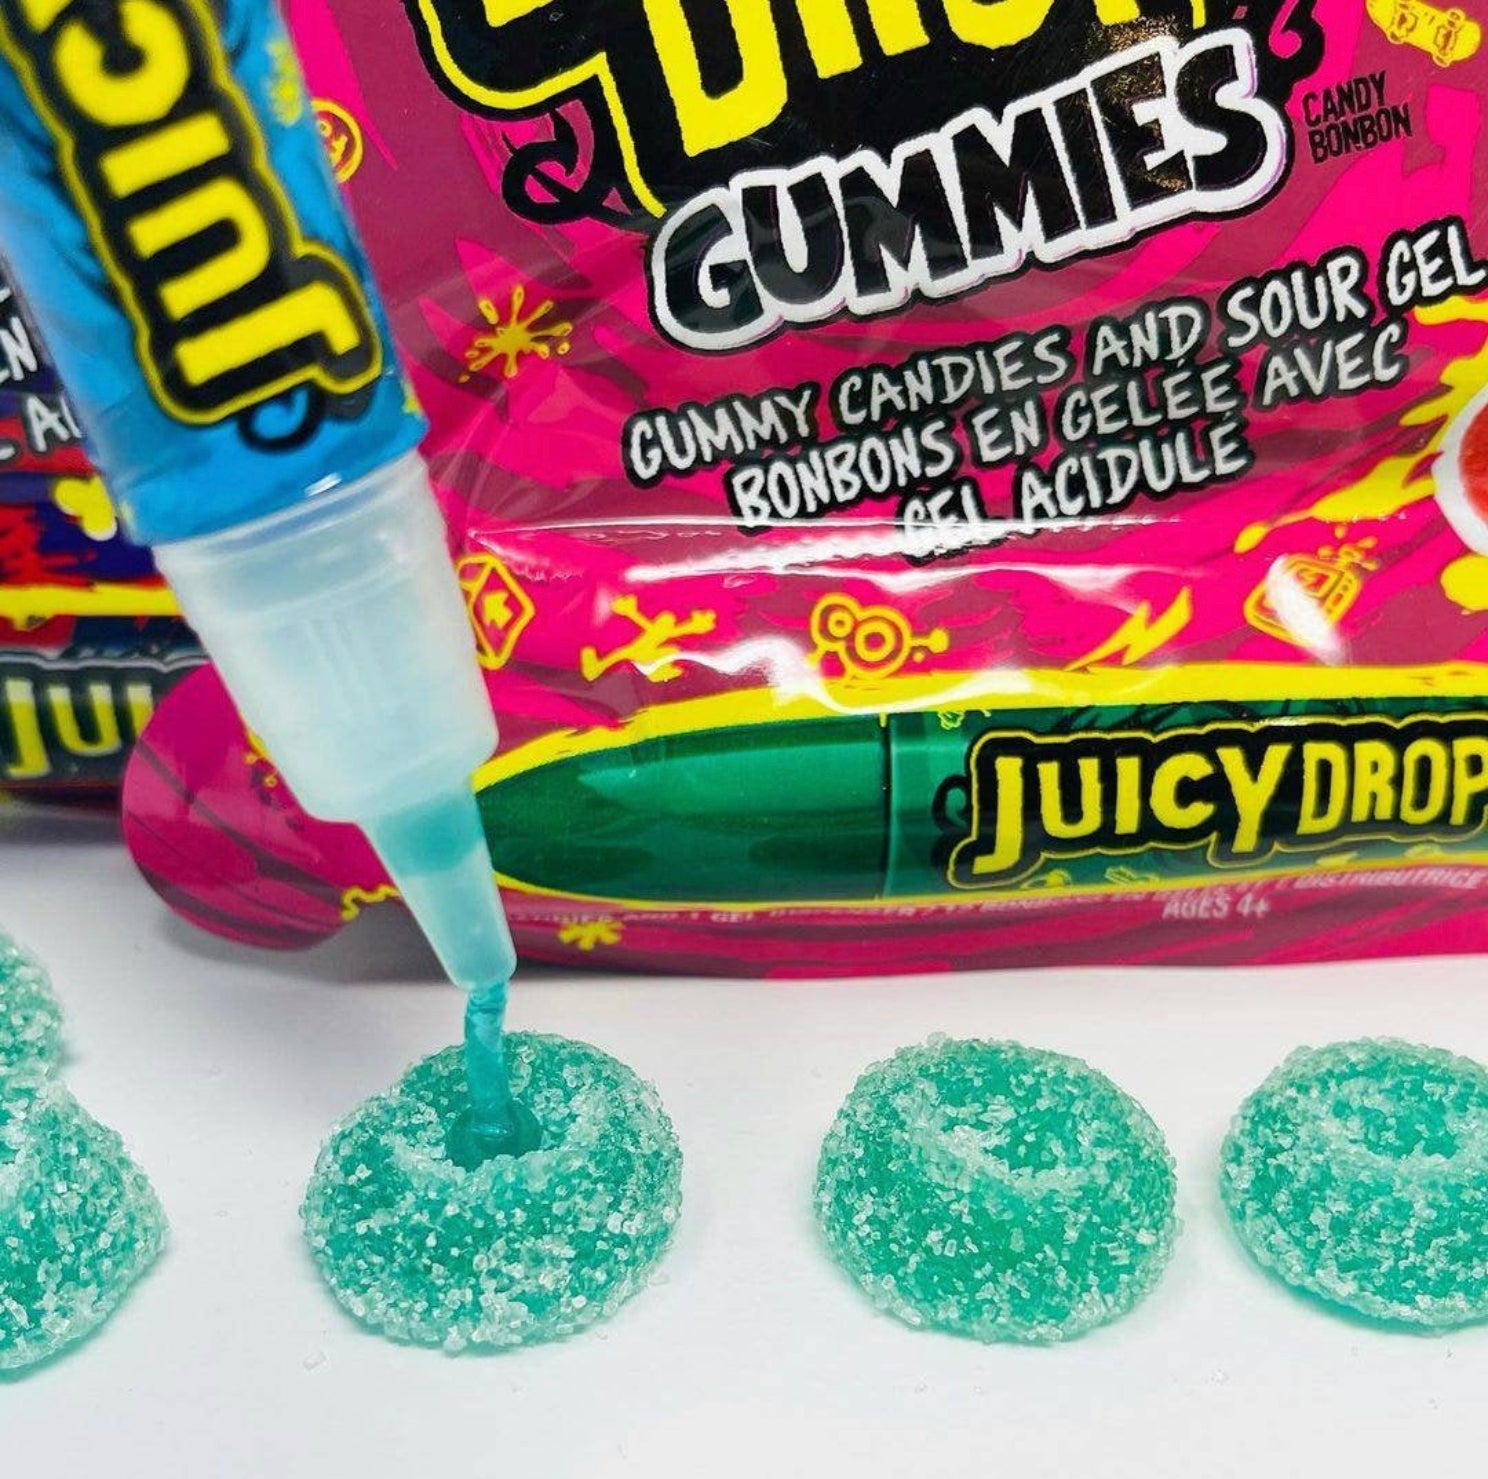 Juicy Drop Re-Mix Sweet & Sour Chewy Candy Variety Pack - Sweet & Sour  Candy Bites in Assorted Fruity Flavors